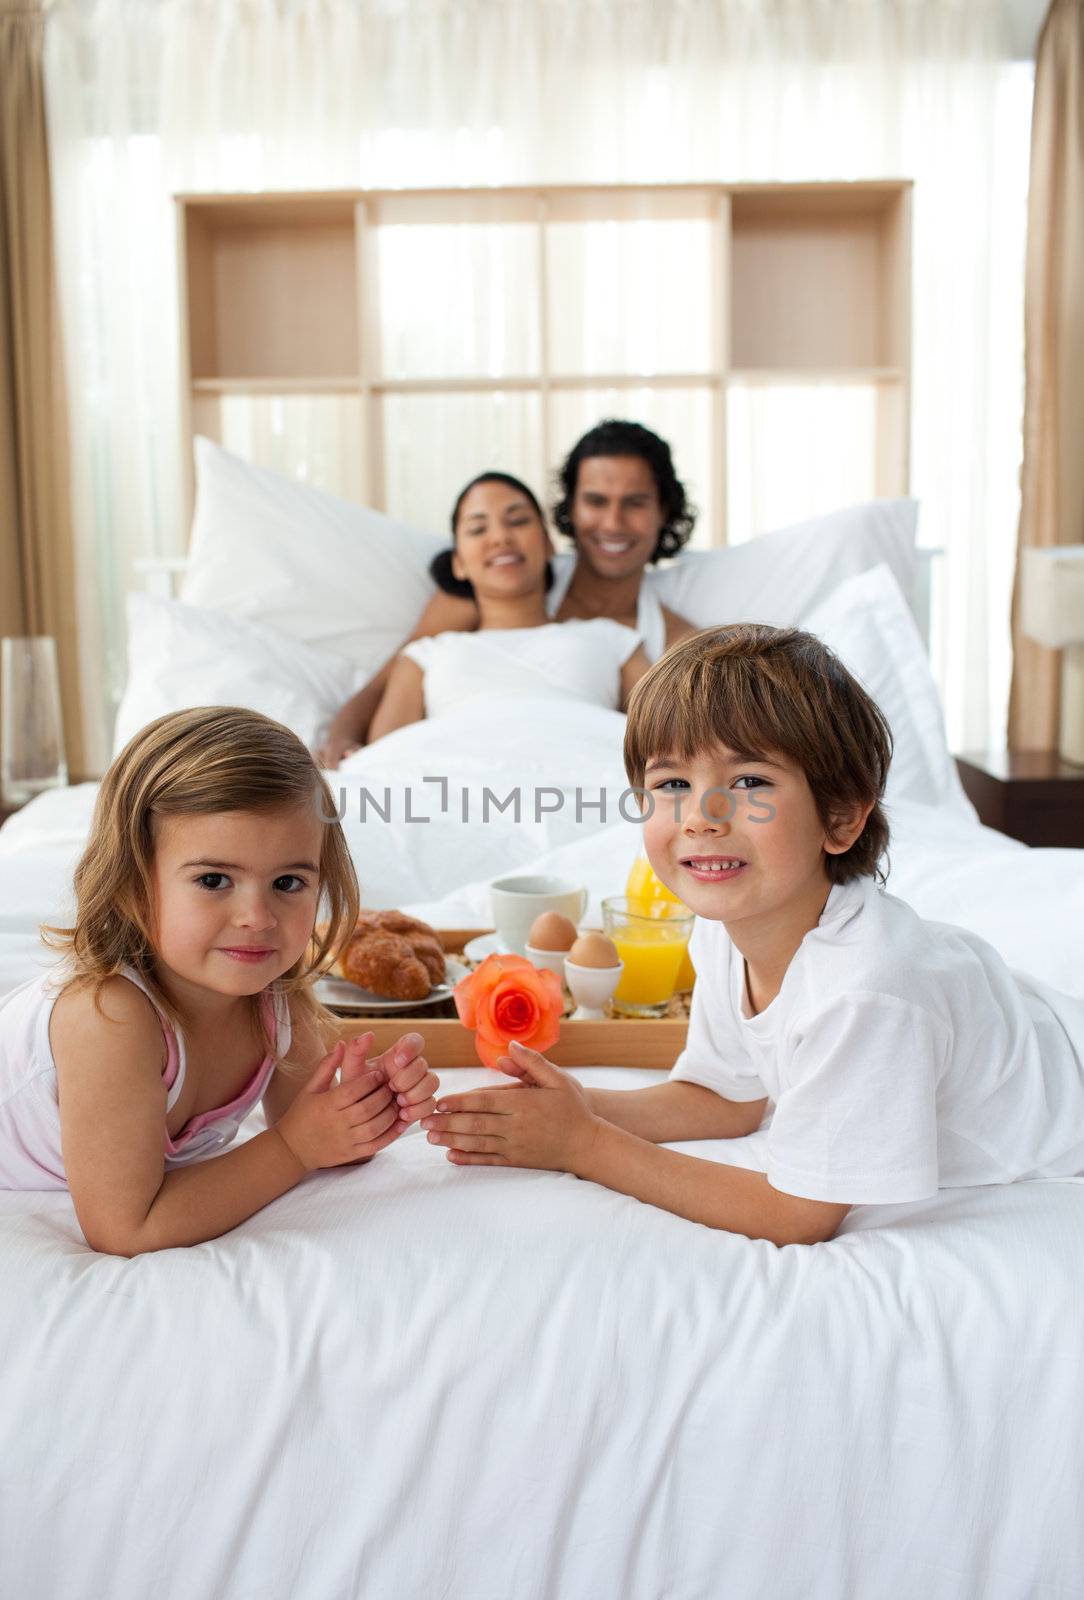 Siblings having breakfast with their parents lying on the bed